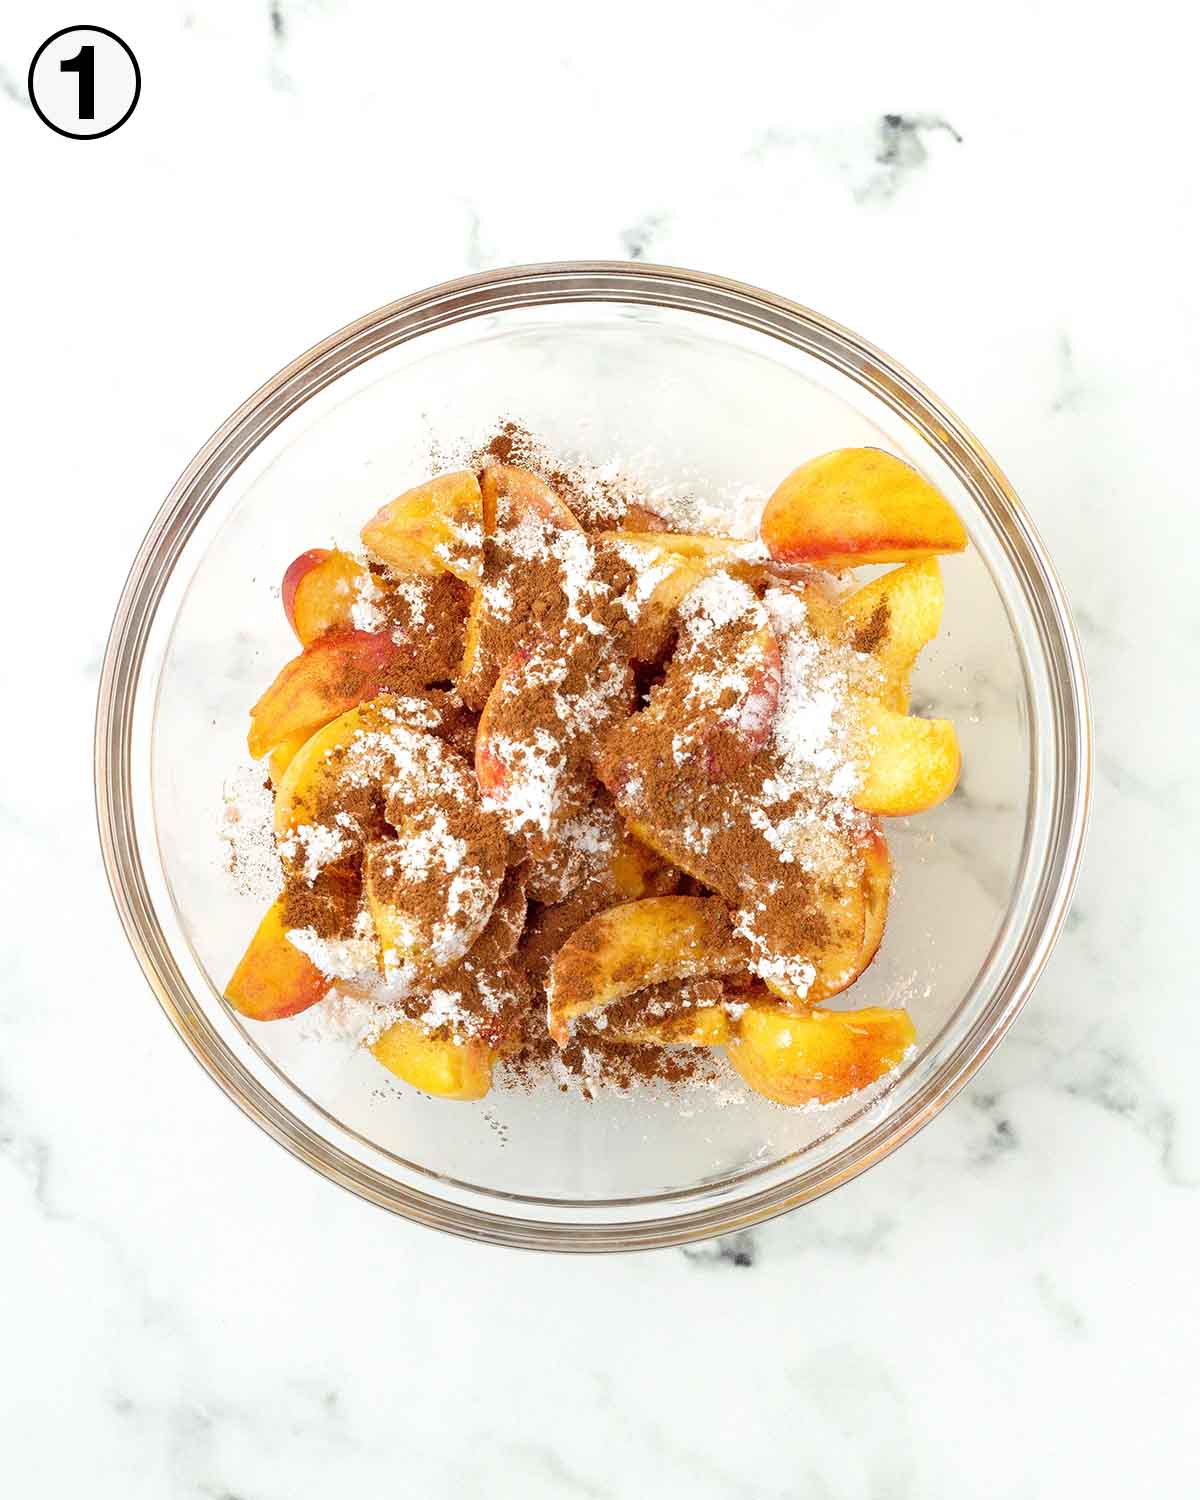 A glass bowl filled with sliced fresh peaches, sugar, cornstarch and cinnamon sits on top of the peaches.